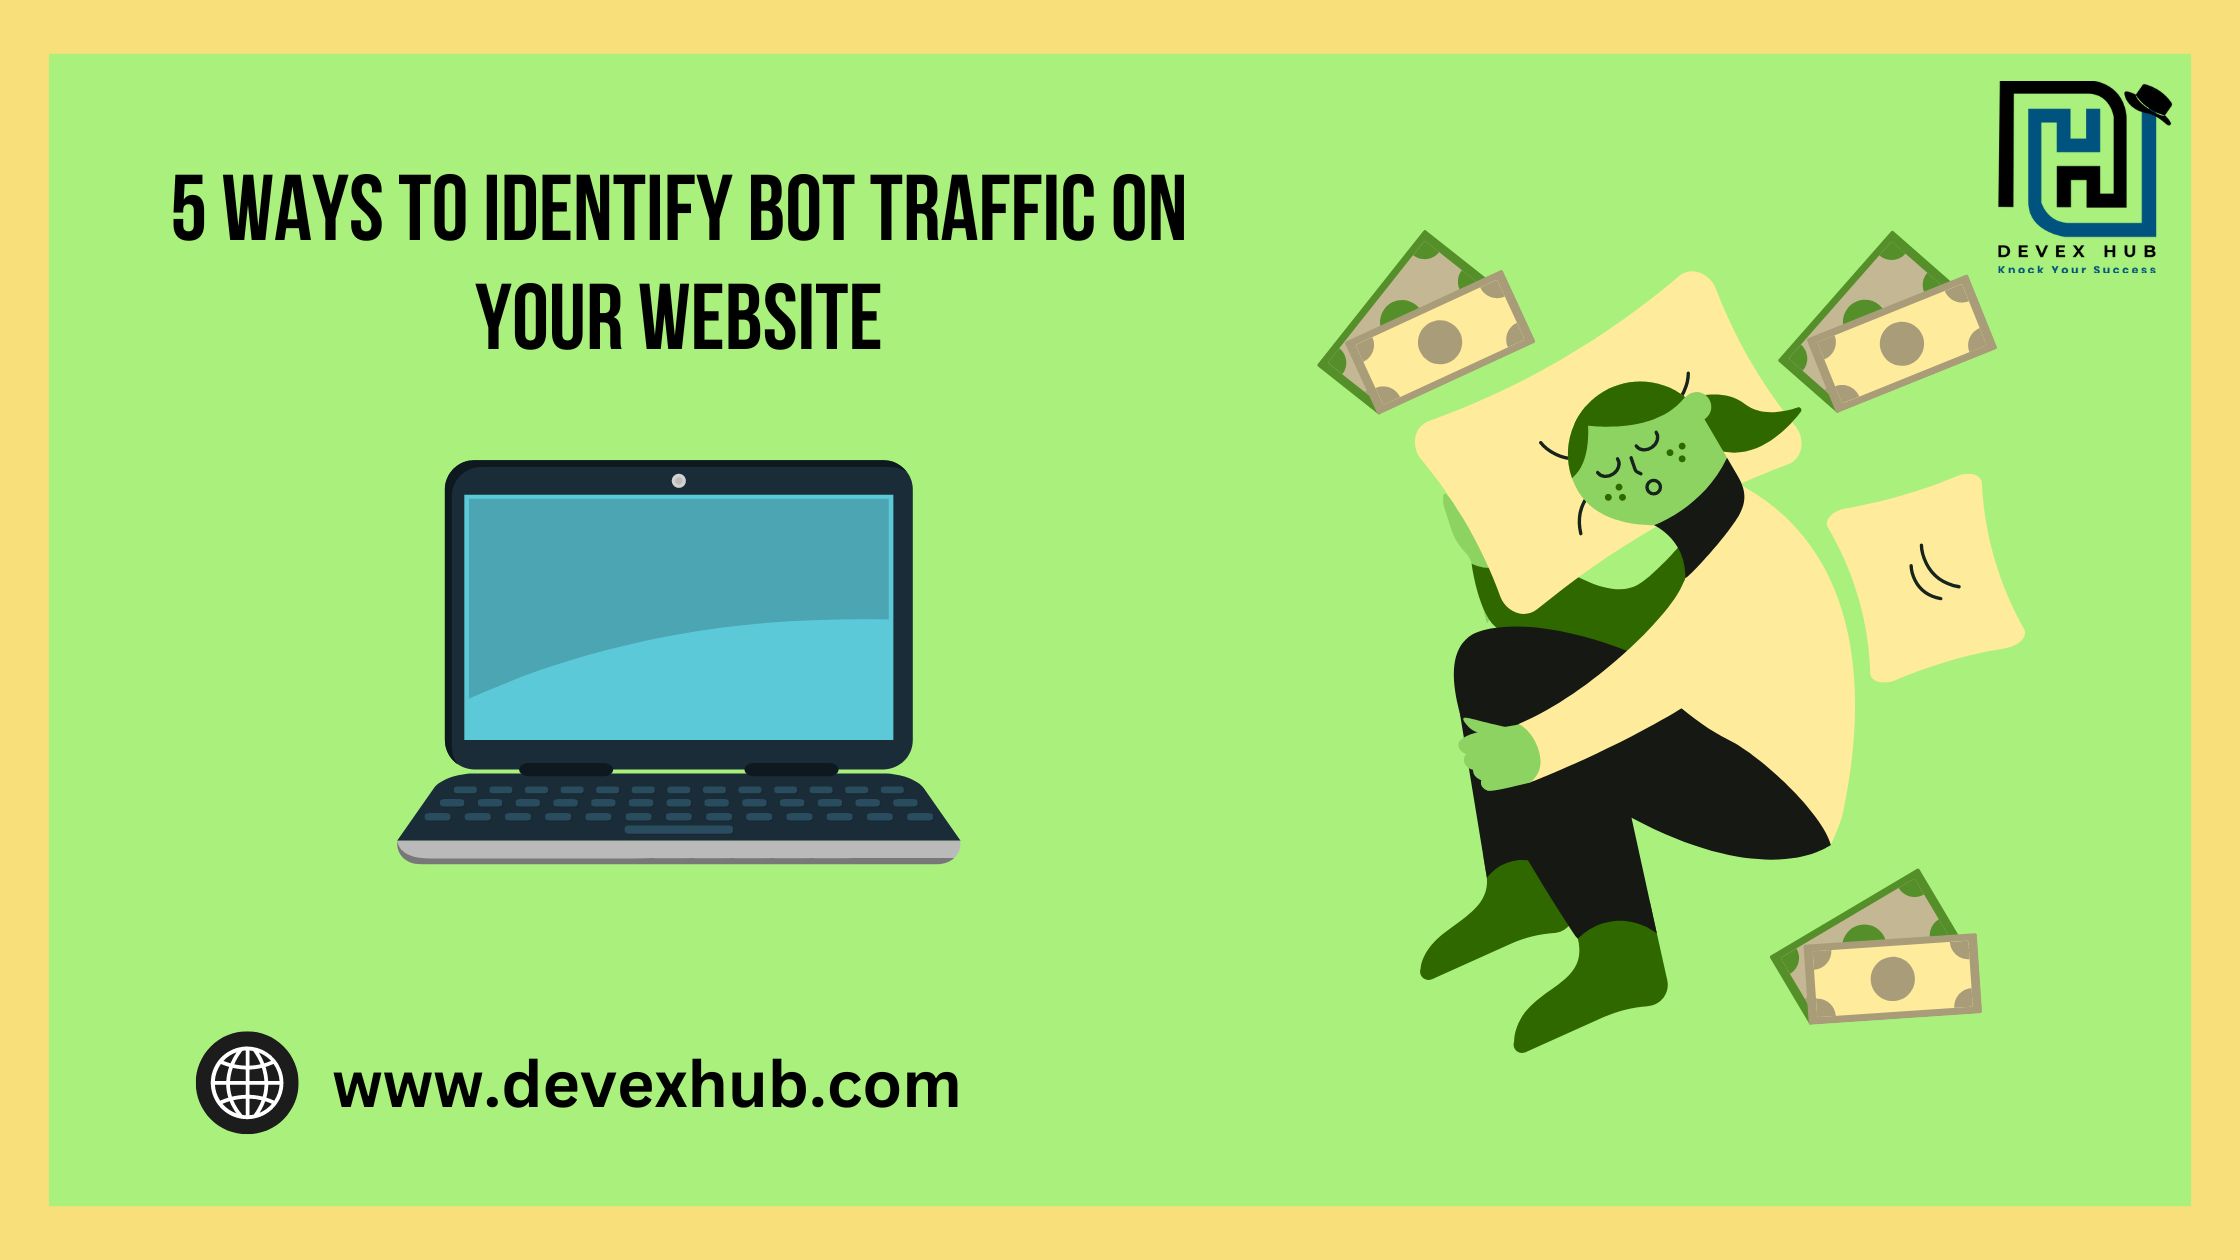 5 Ways to Identify Bot Traffic on Your Website image